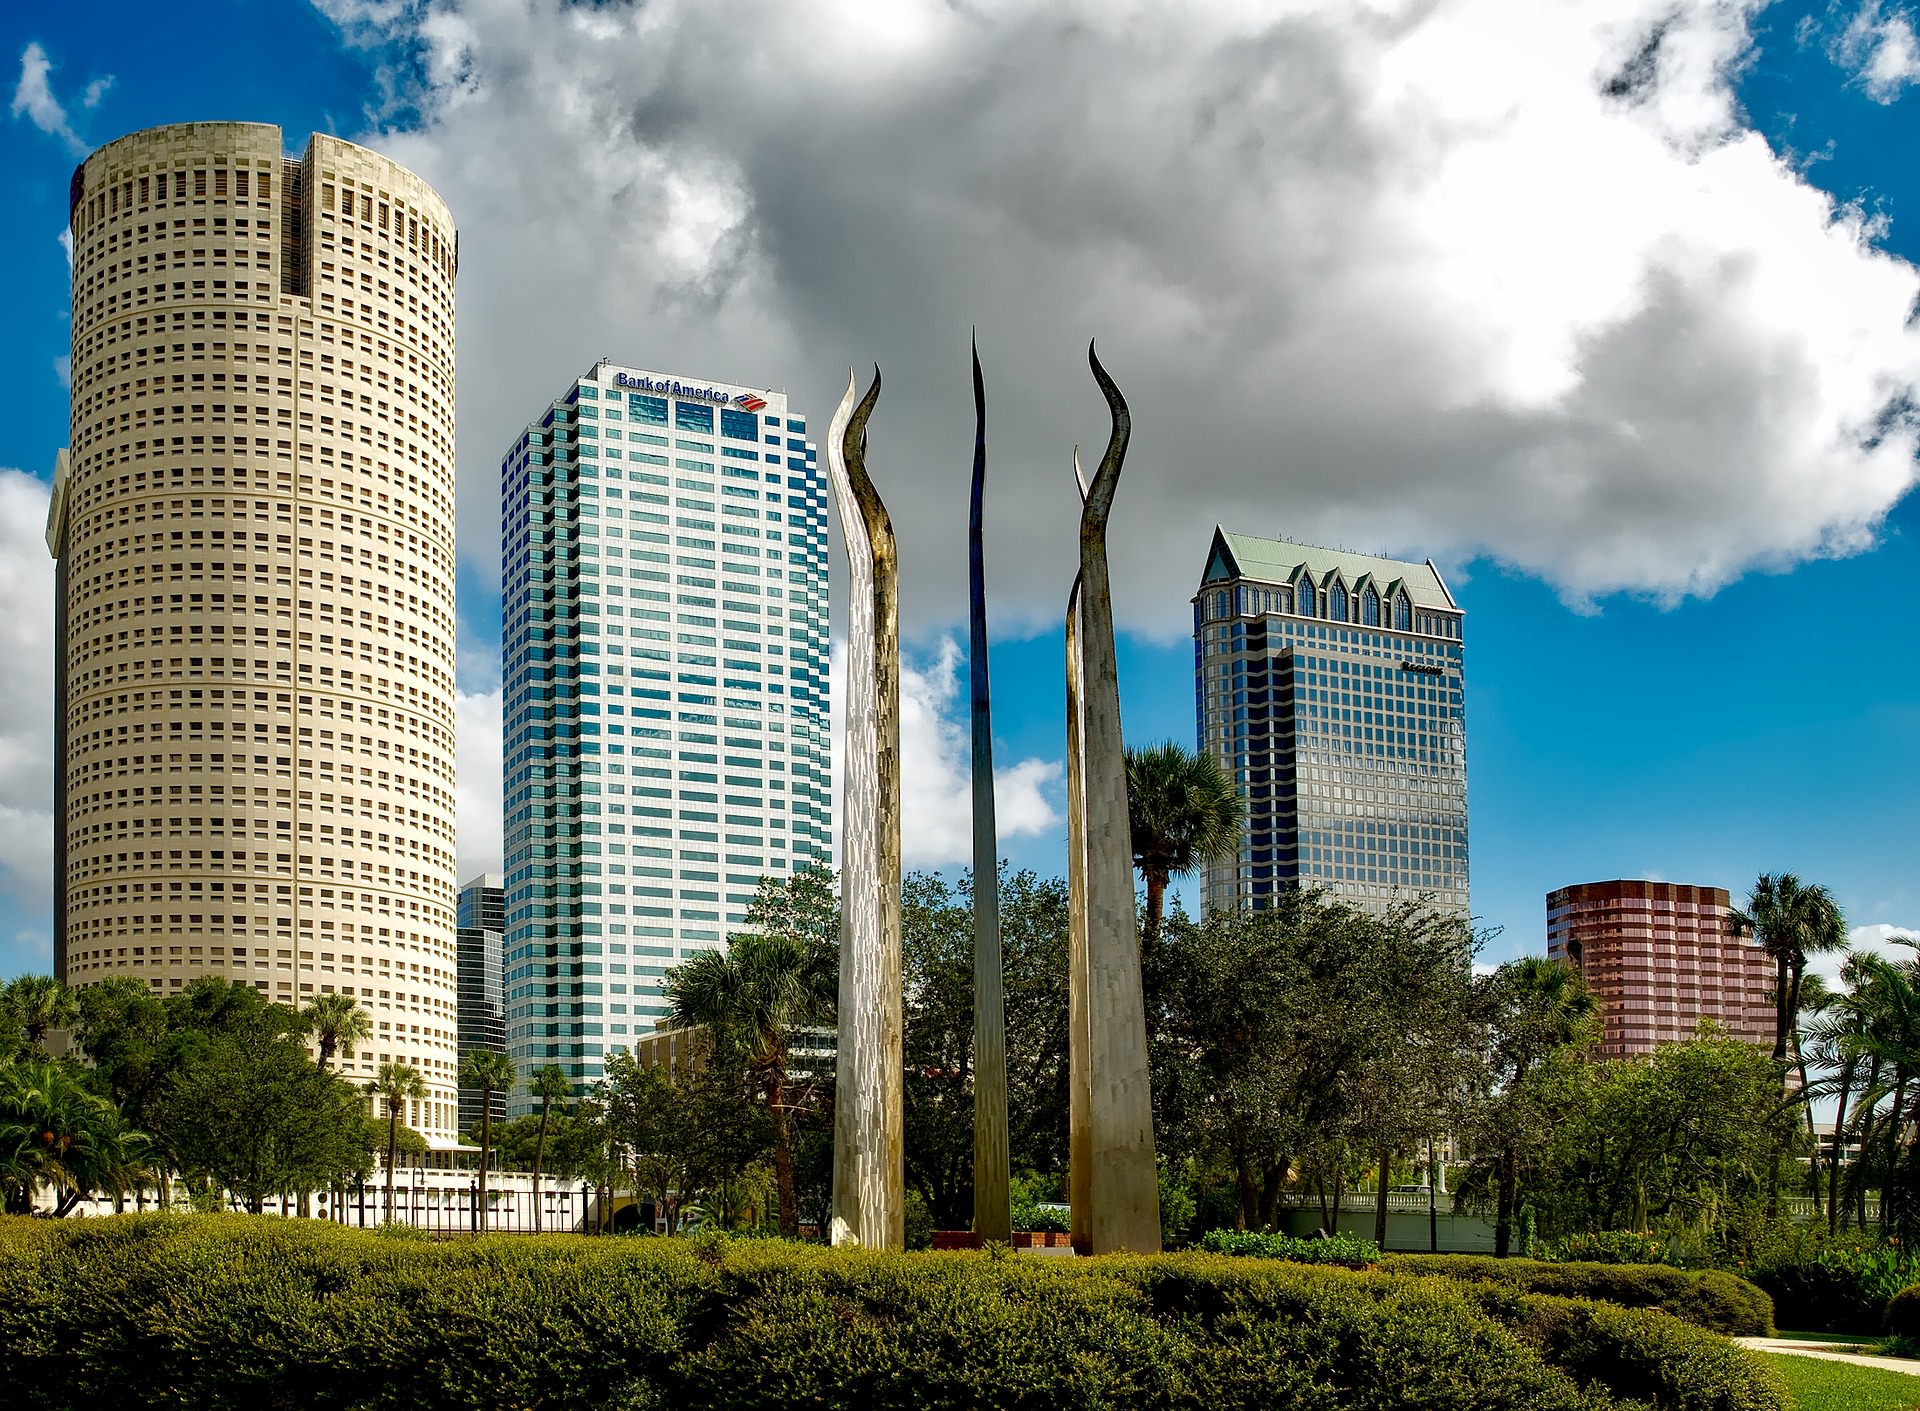 What Sort Of Potential Does Alternative Energy Have For The People Of Tampa?